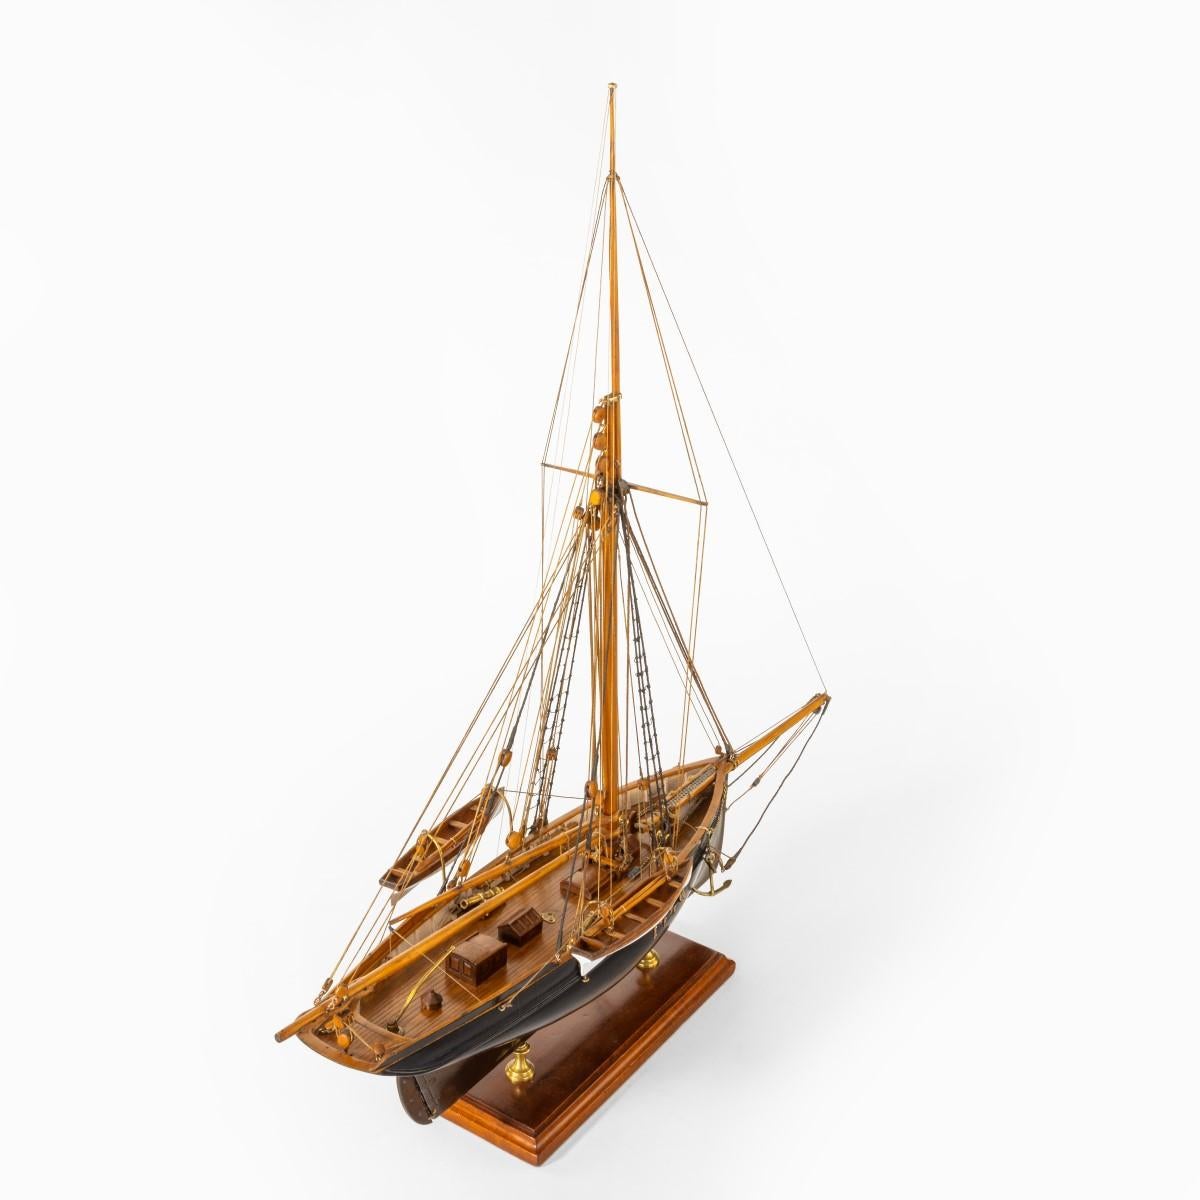 Metal Shipyard Model of a Gaff-Rigged Newhaven Smack